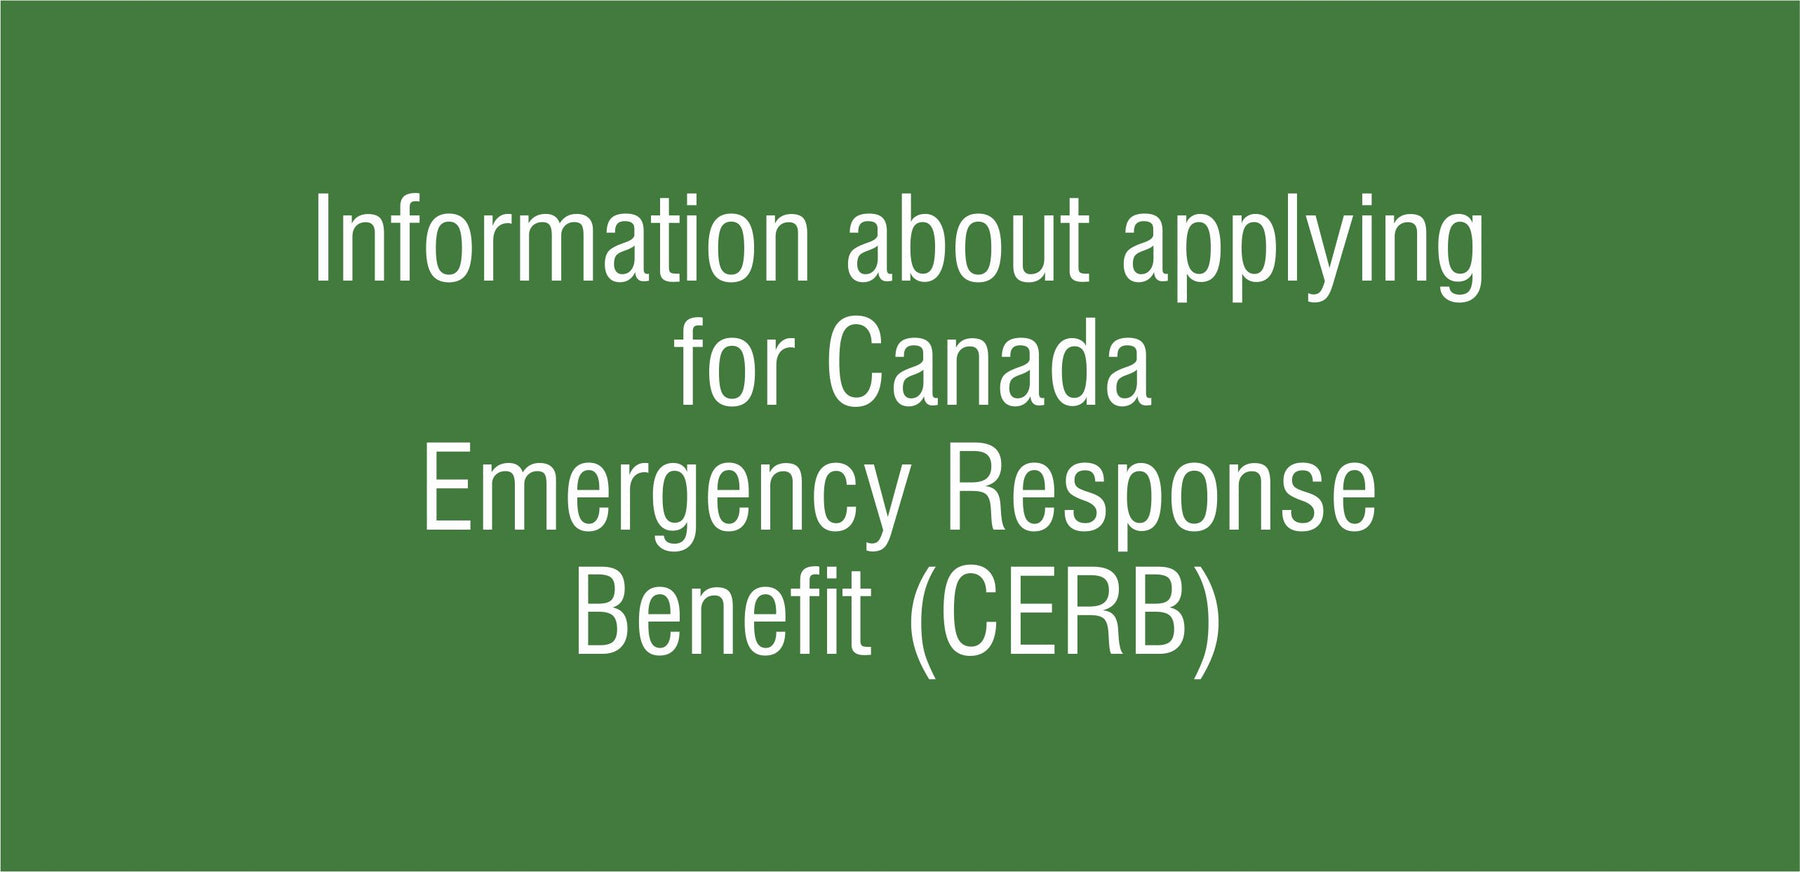 Information about applying for Canada Emergency Response Benefit (CERB)